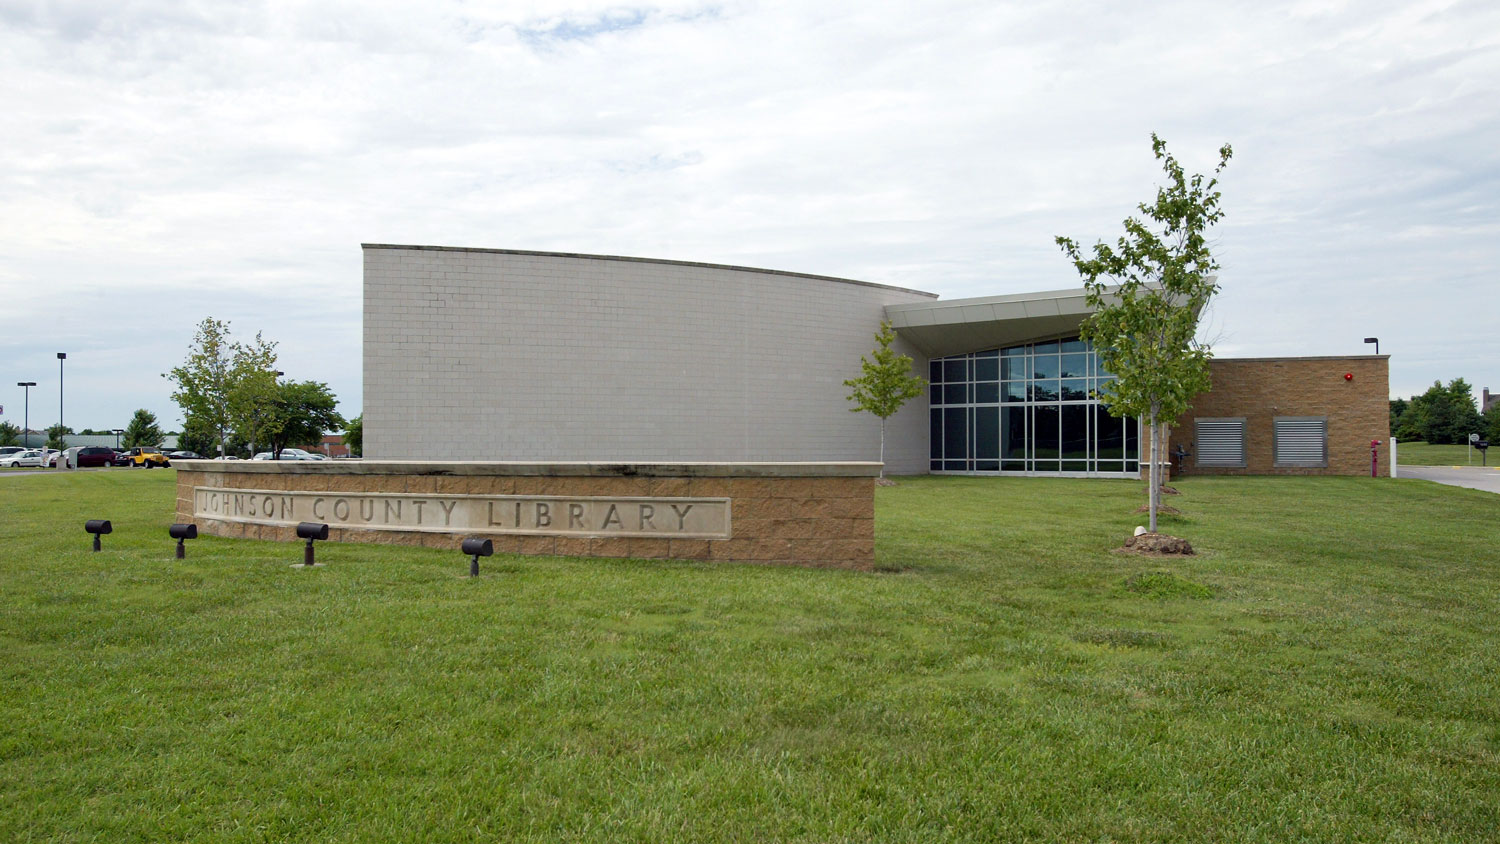 library building with brick sign in grassy lawn, curved wall, tall glass windows, and brick-faced delivery area